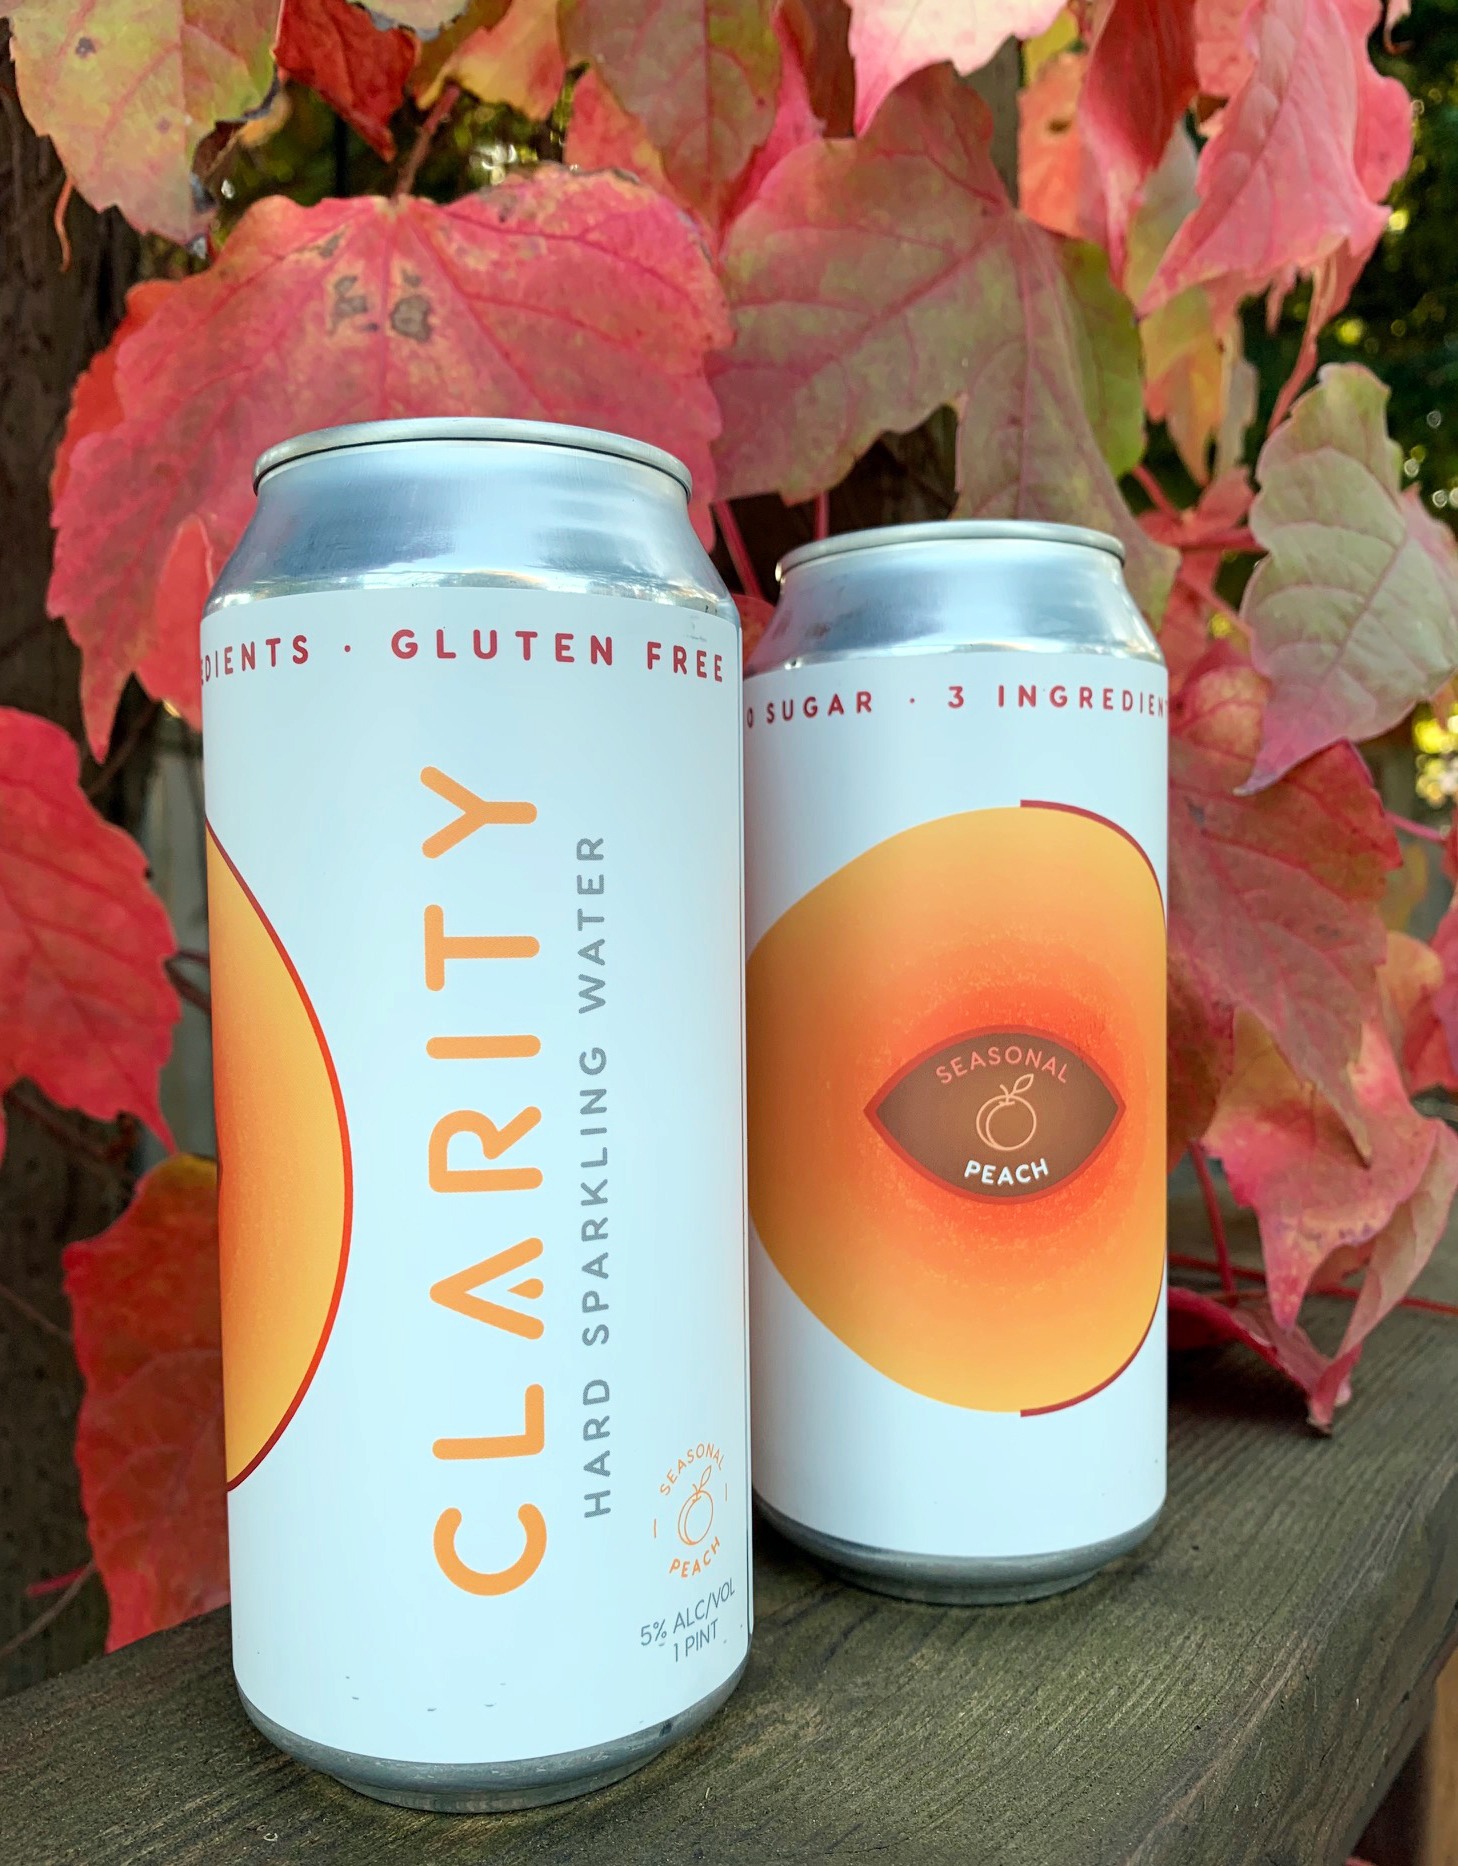 image of Clarity Peach courtesy of Clarity Hard Sparkling Water